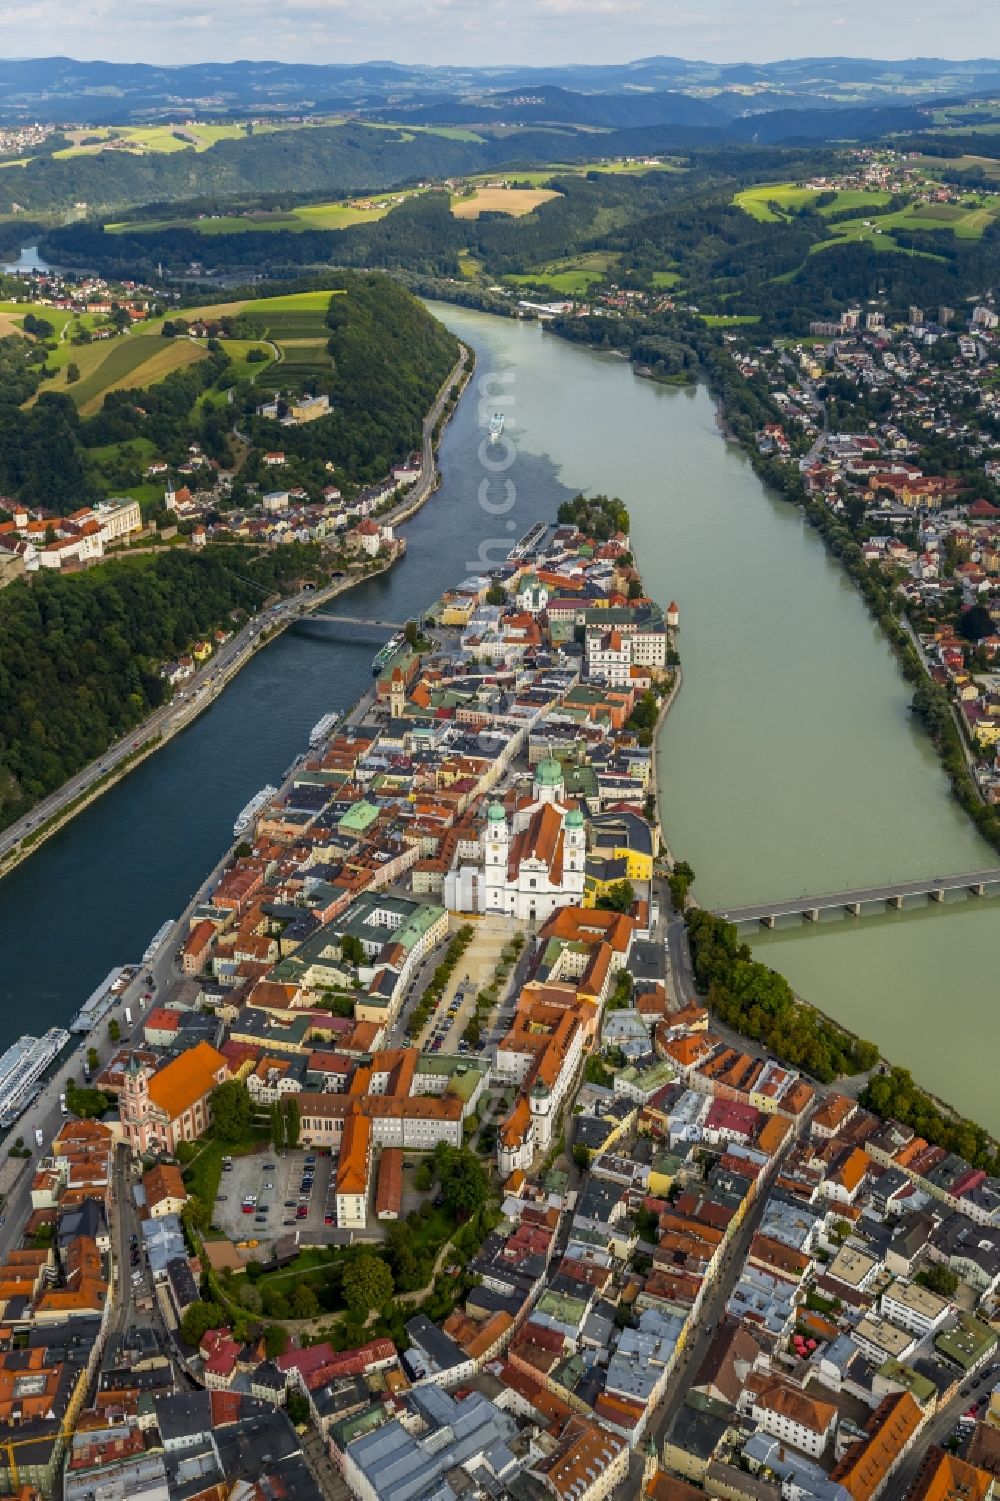 Aerial image Passau - The university town of Passau in the state of Bavaria. Because of the junction of the rivers Ilz, Inn and Danube, Passau is also called Three Rivers Town. Visible here is the pointed peninsula, which is surrounded by the Inn to the South and the Danube to the North. It is the site of the cathedral St. Stephan. The river Ilz joins the other two by running through the Untersolden part of the town